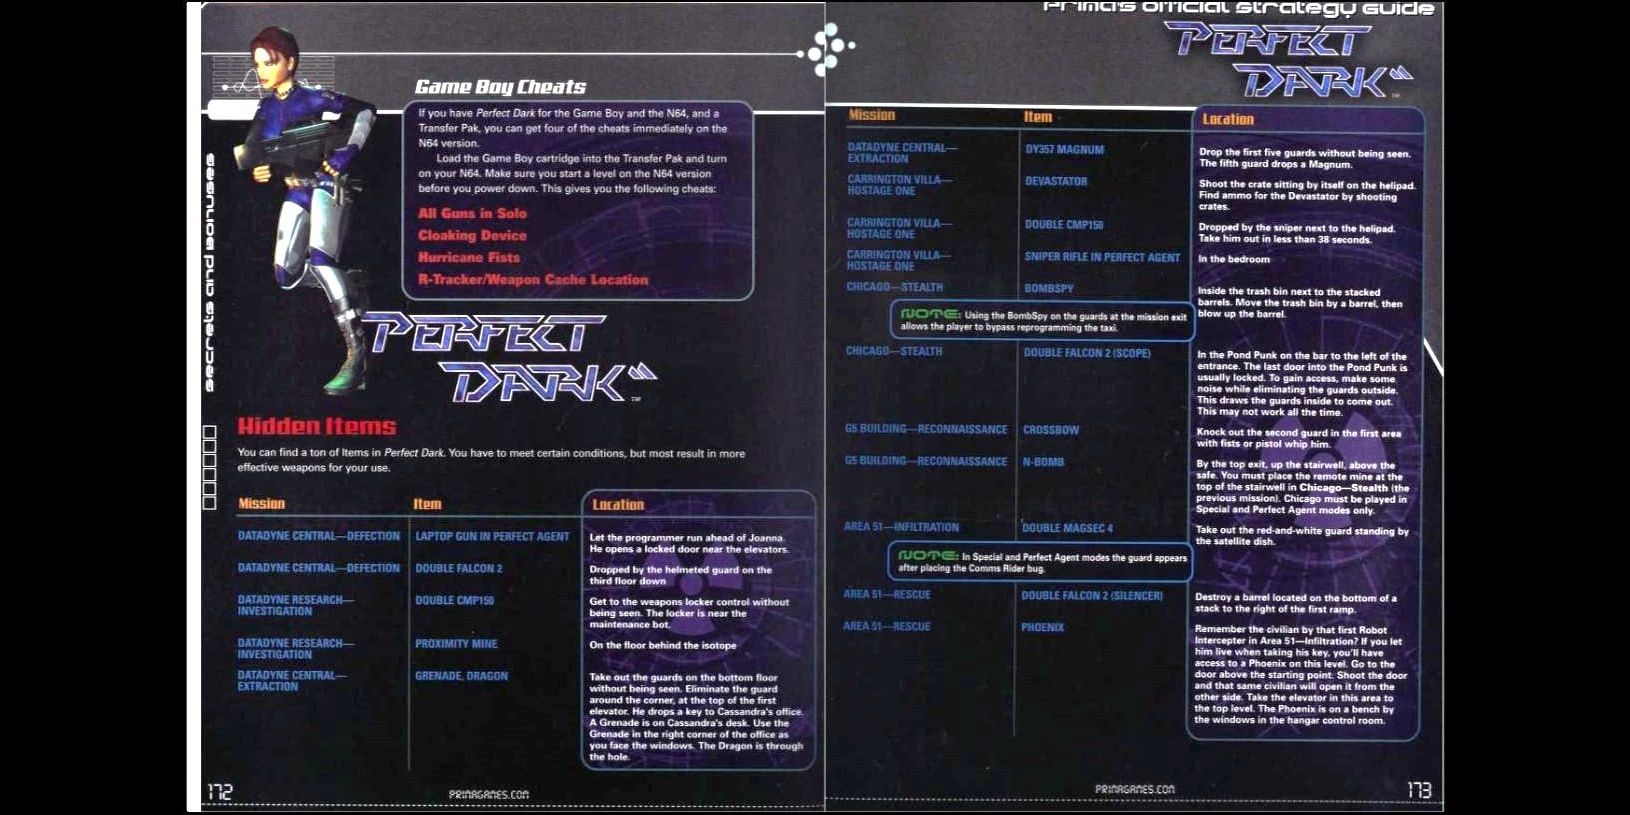 The Perfect Dark strategy guide helped many gamers